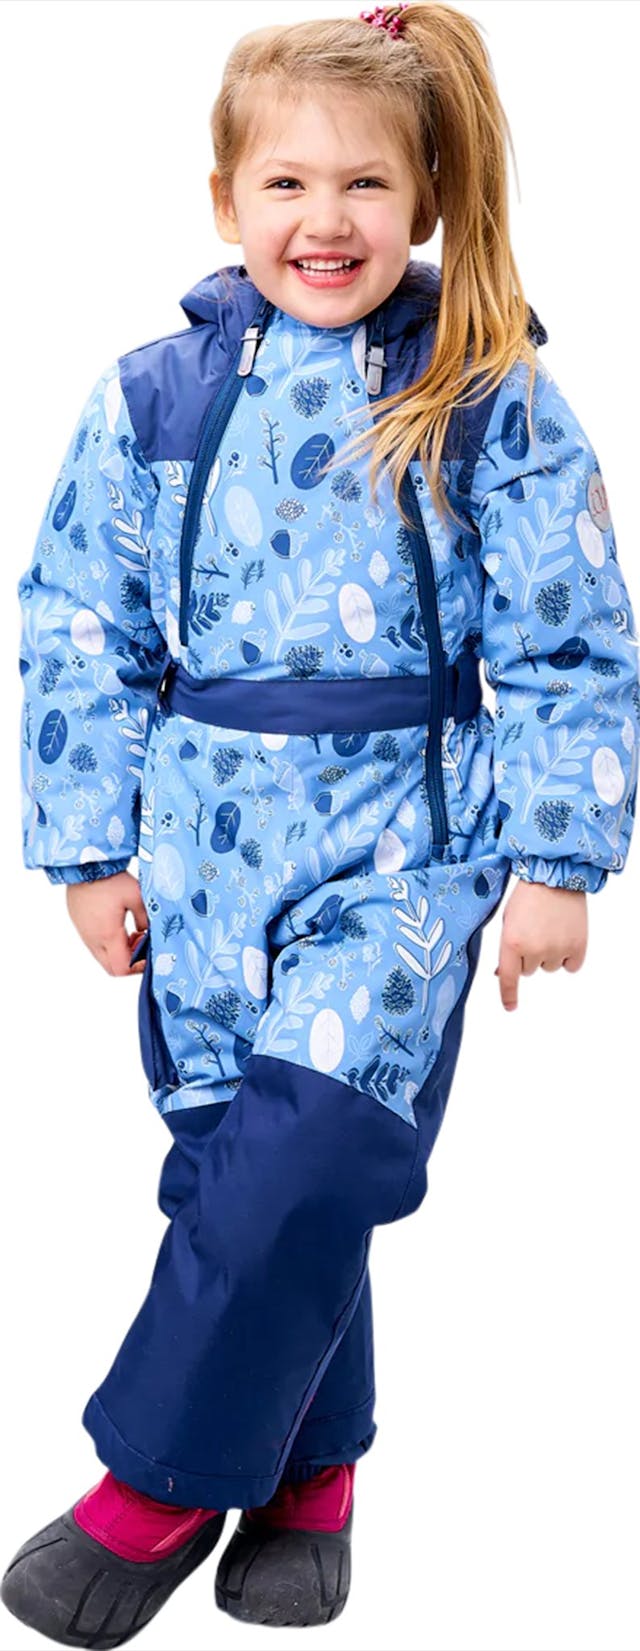 Product image for Asio One-Piece Snowsuit - Little Kids